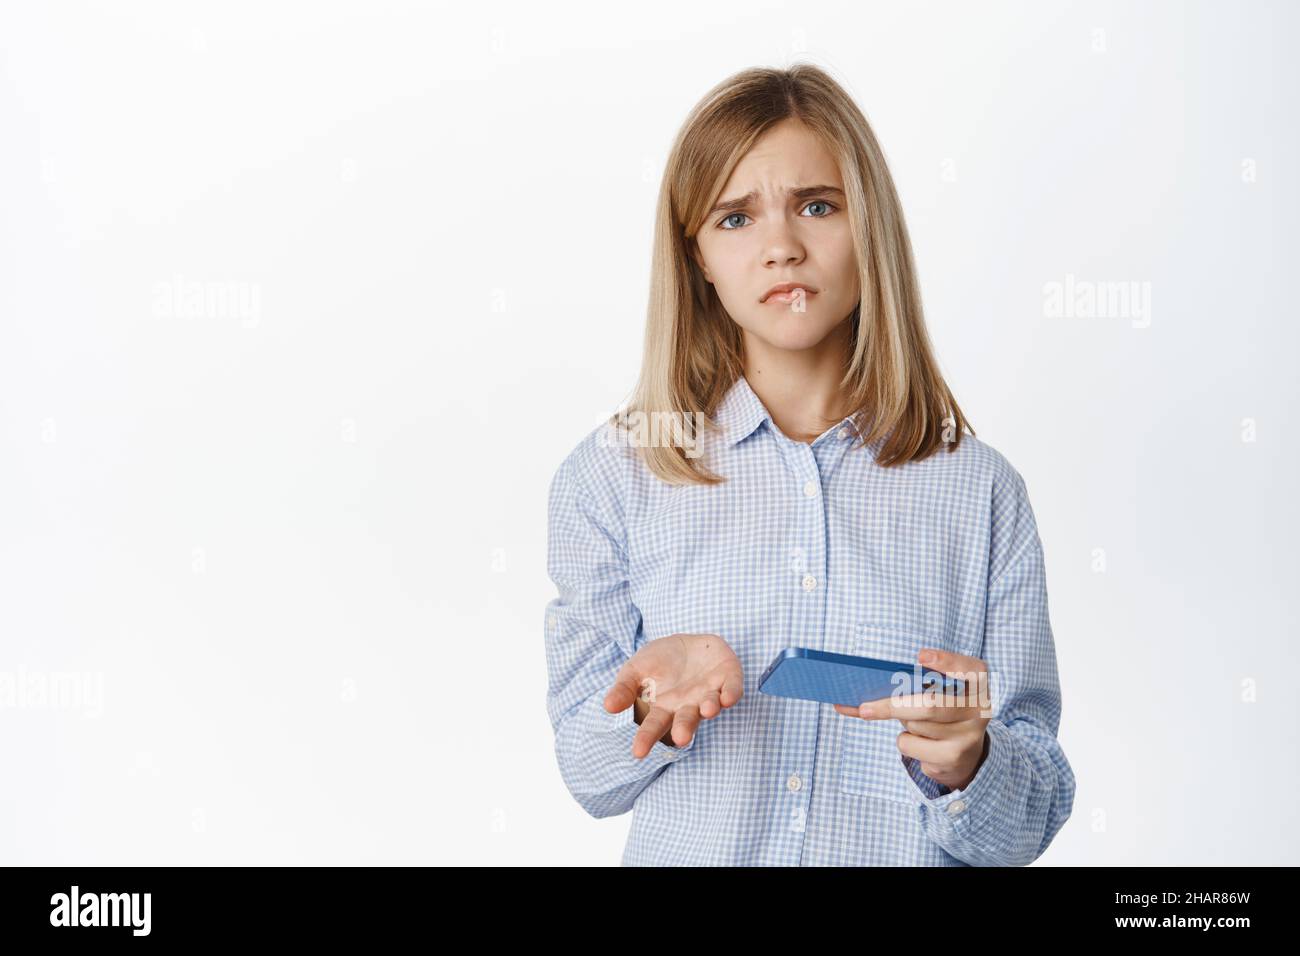 Sad and disappointed girl holding smartphone and looking upset, losing in video game, watching video on mobile phone, standing over white background Stock Photo